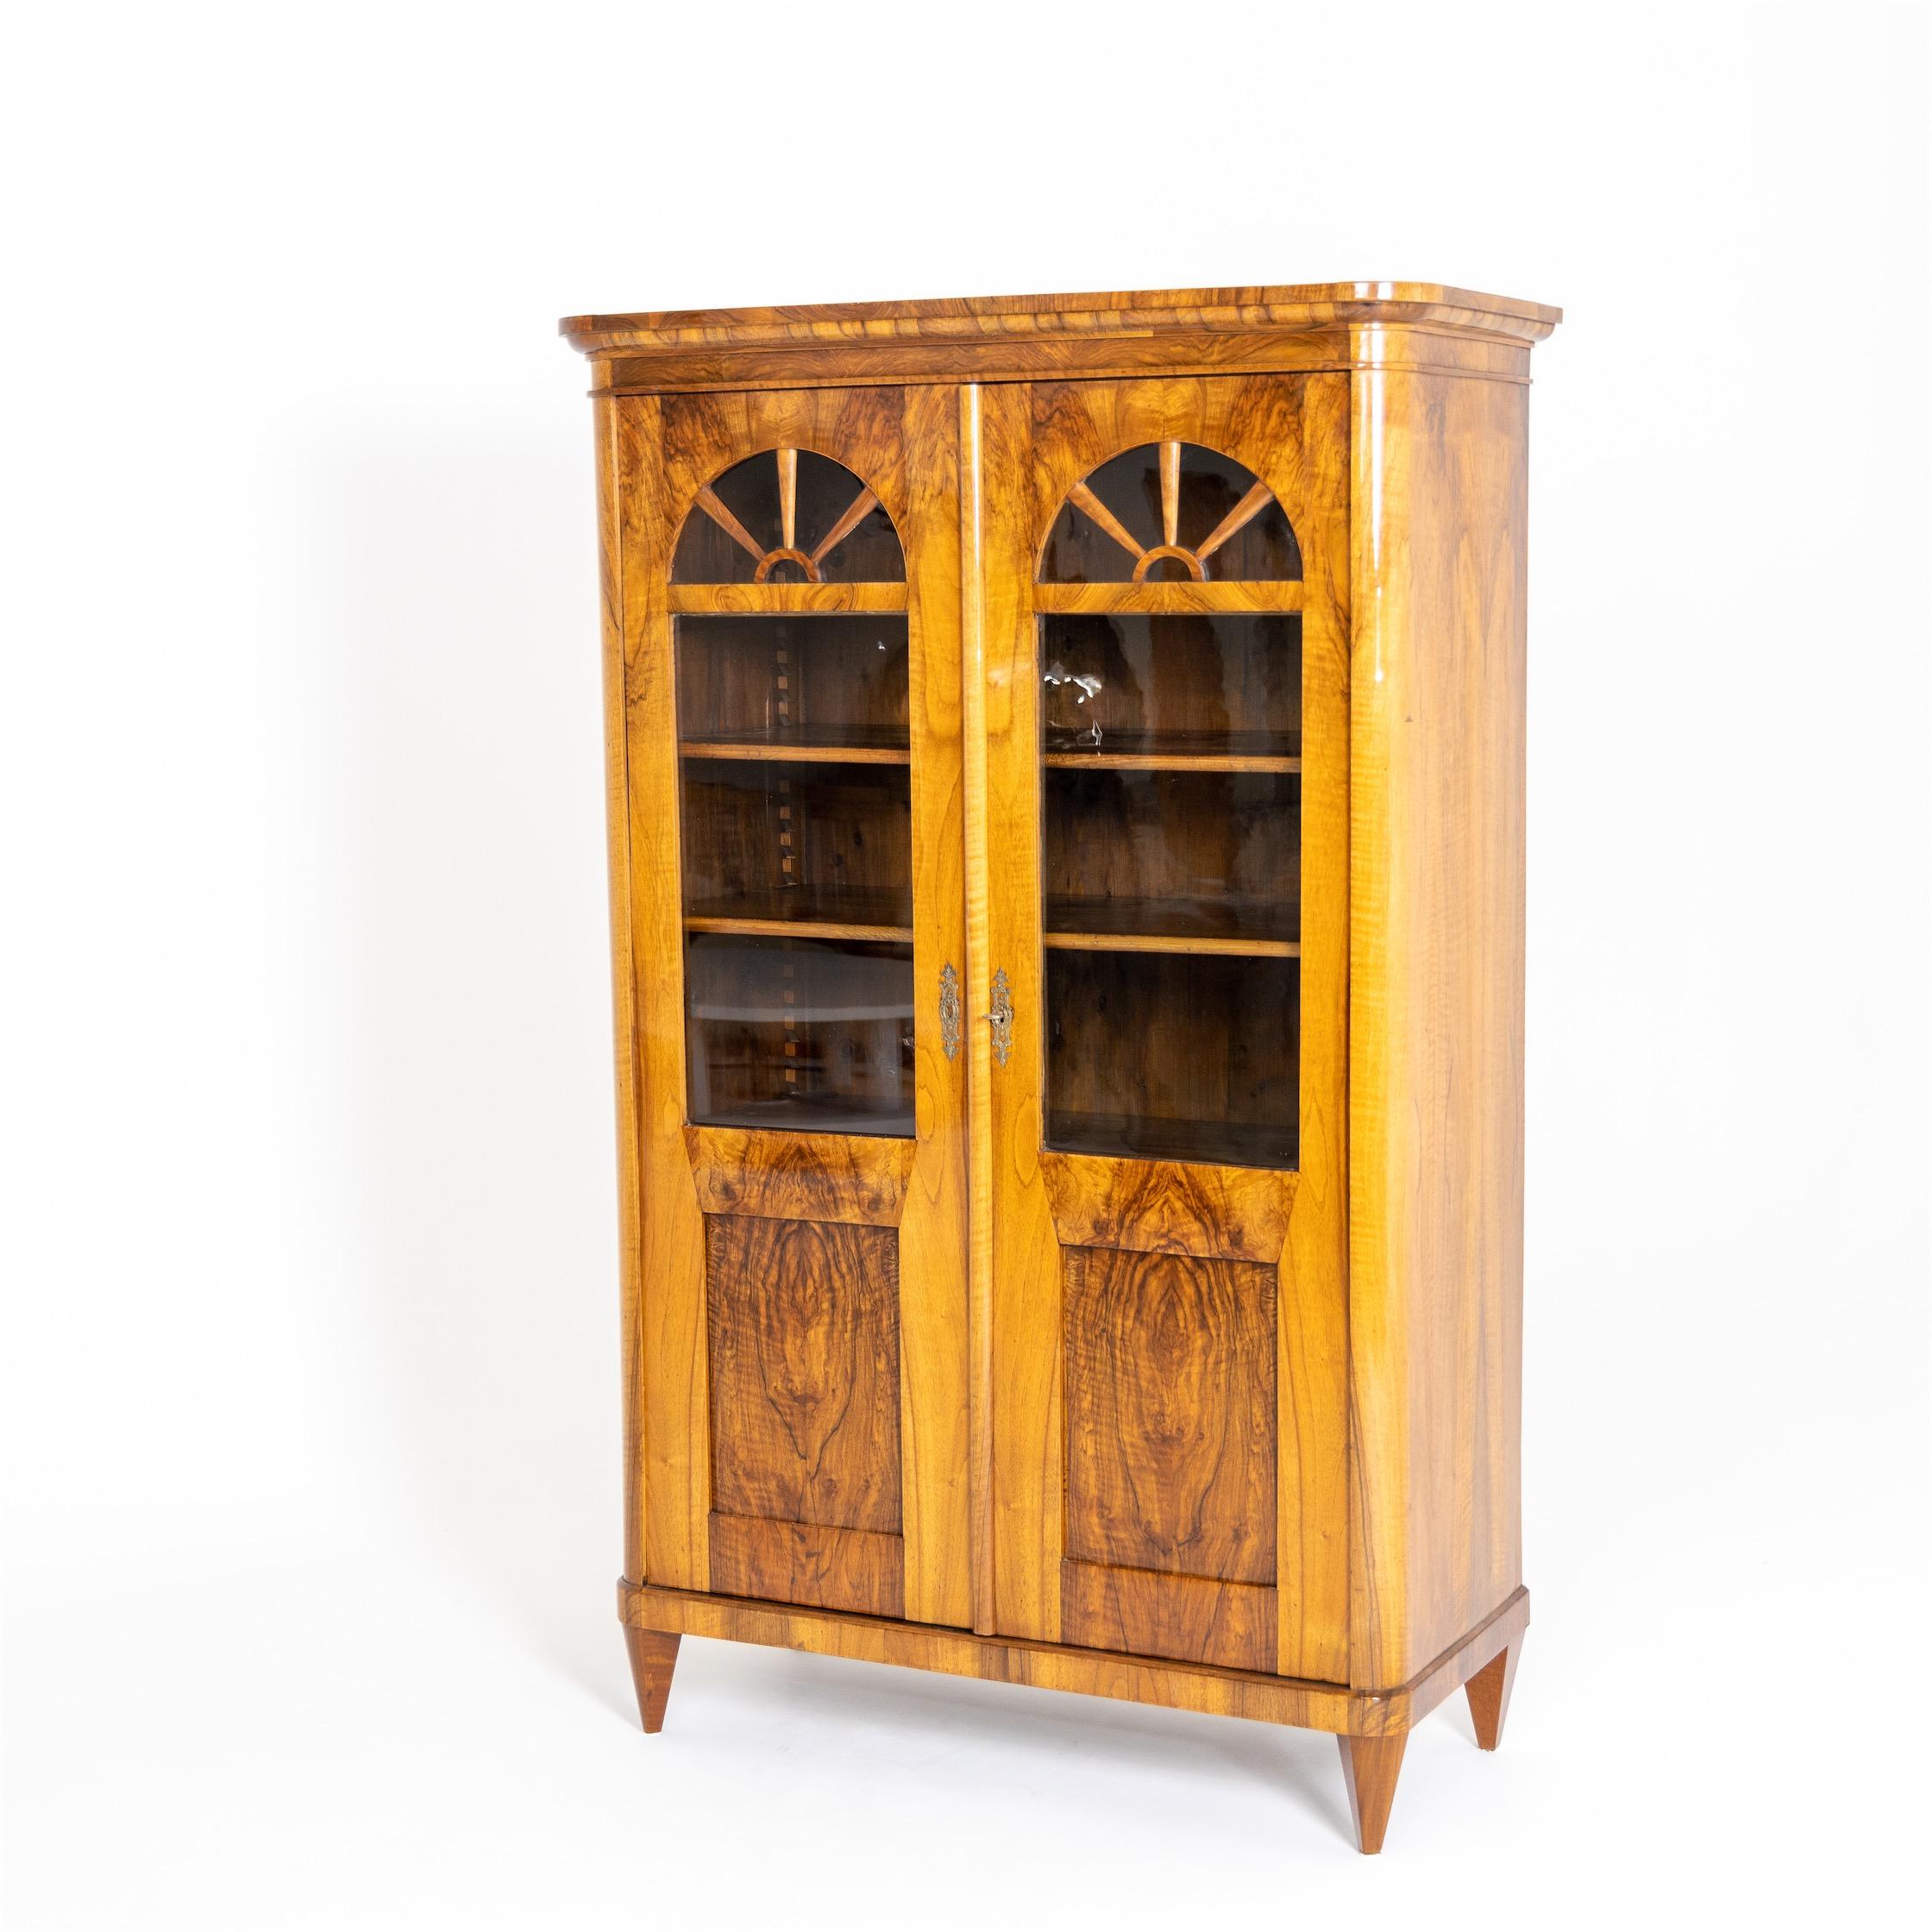 Two-door bookcase on conical legs with rounded corners and two-thirds glazing of the doors, which ends in a segmental arch in the upper area. The interior consists of shelves that can be adjusted in height. Very beautiful walnut veneer, hand